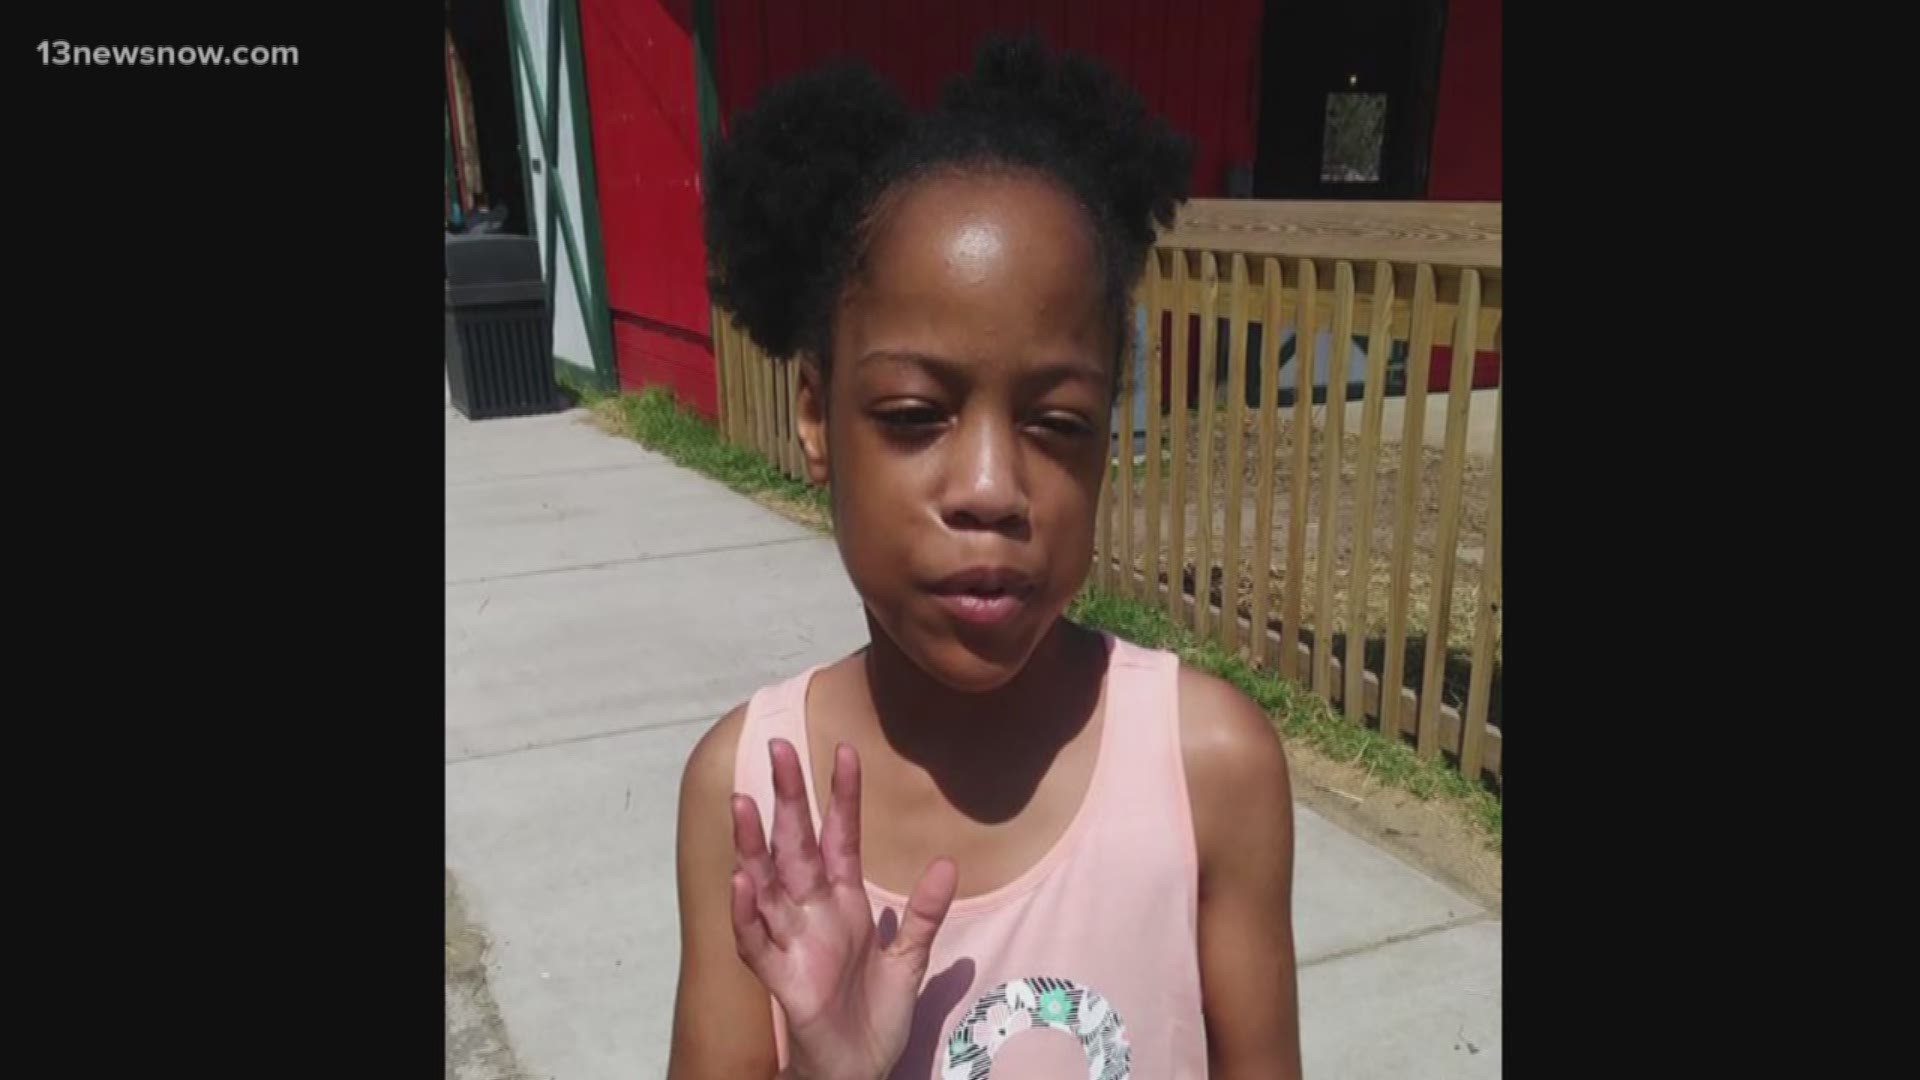 A vigil was held for an 11-year-old girl named Heaven.She was found dead inside her family home last week in Norfolk.